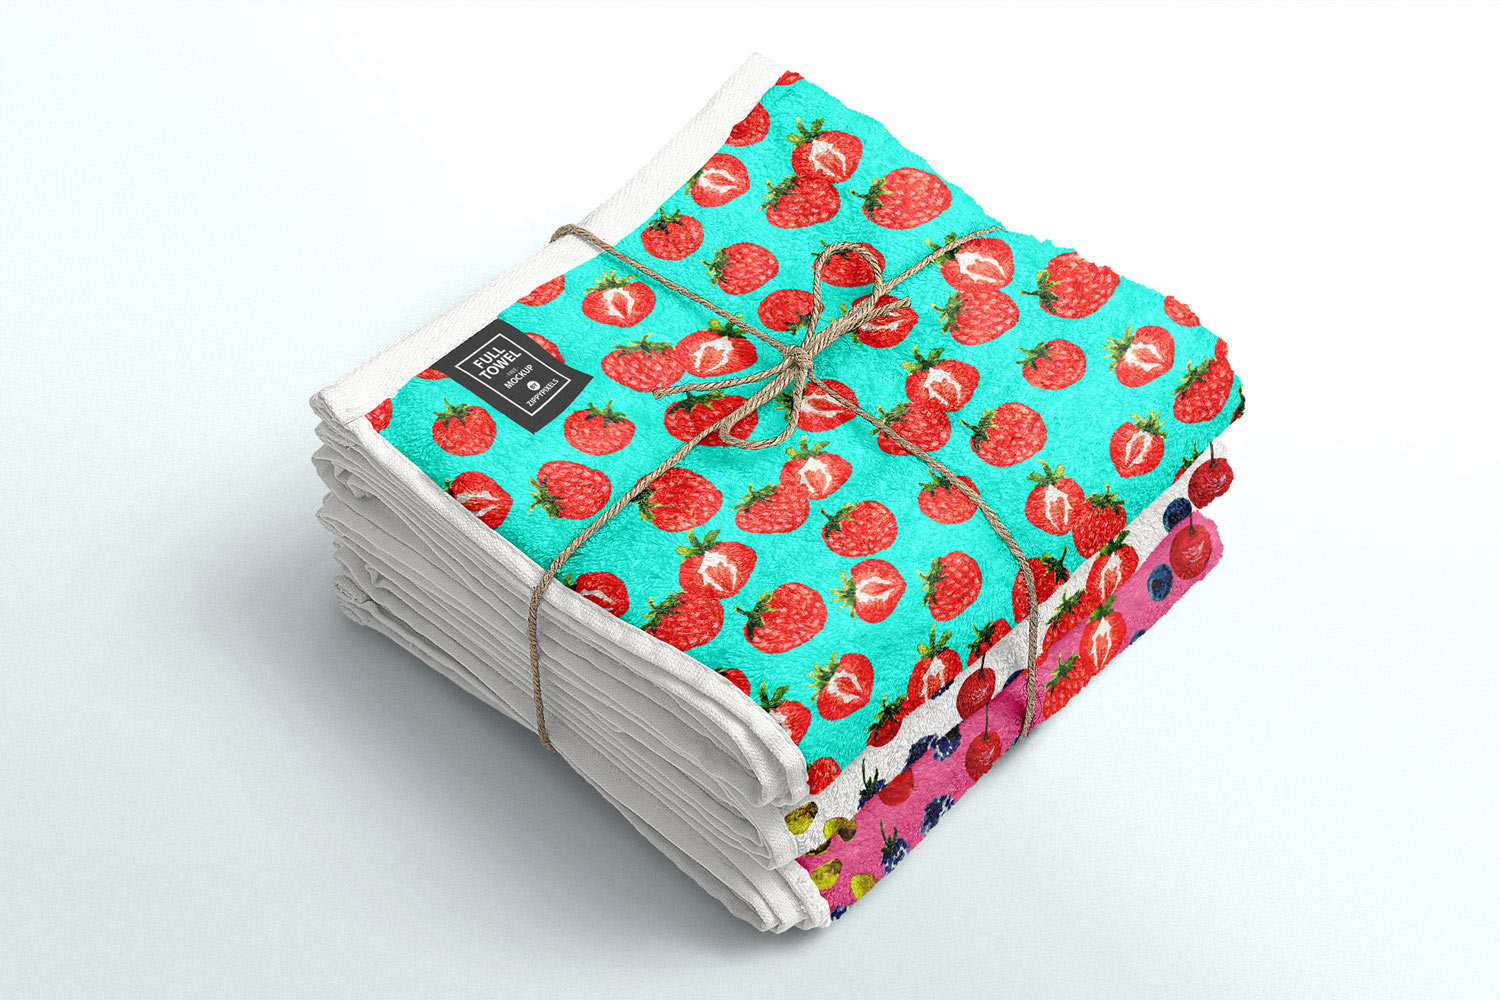 Yummy Fruit Pattern Collection With 25 Seamless Patterns And 7 Backgrounds Towels Print Example.